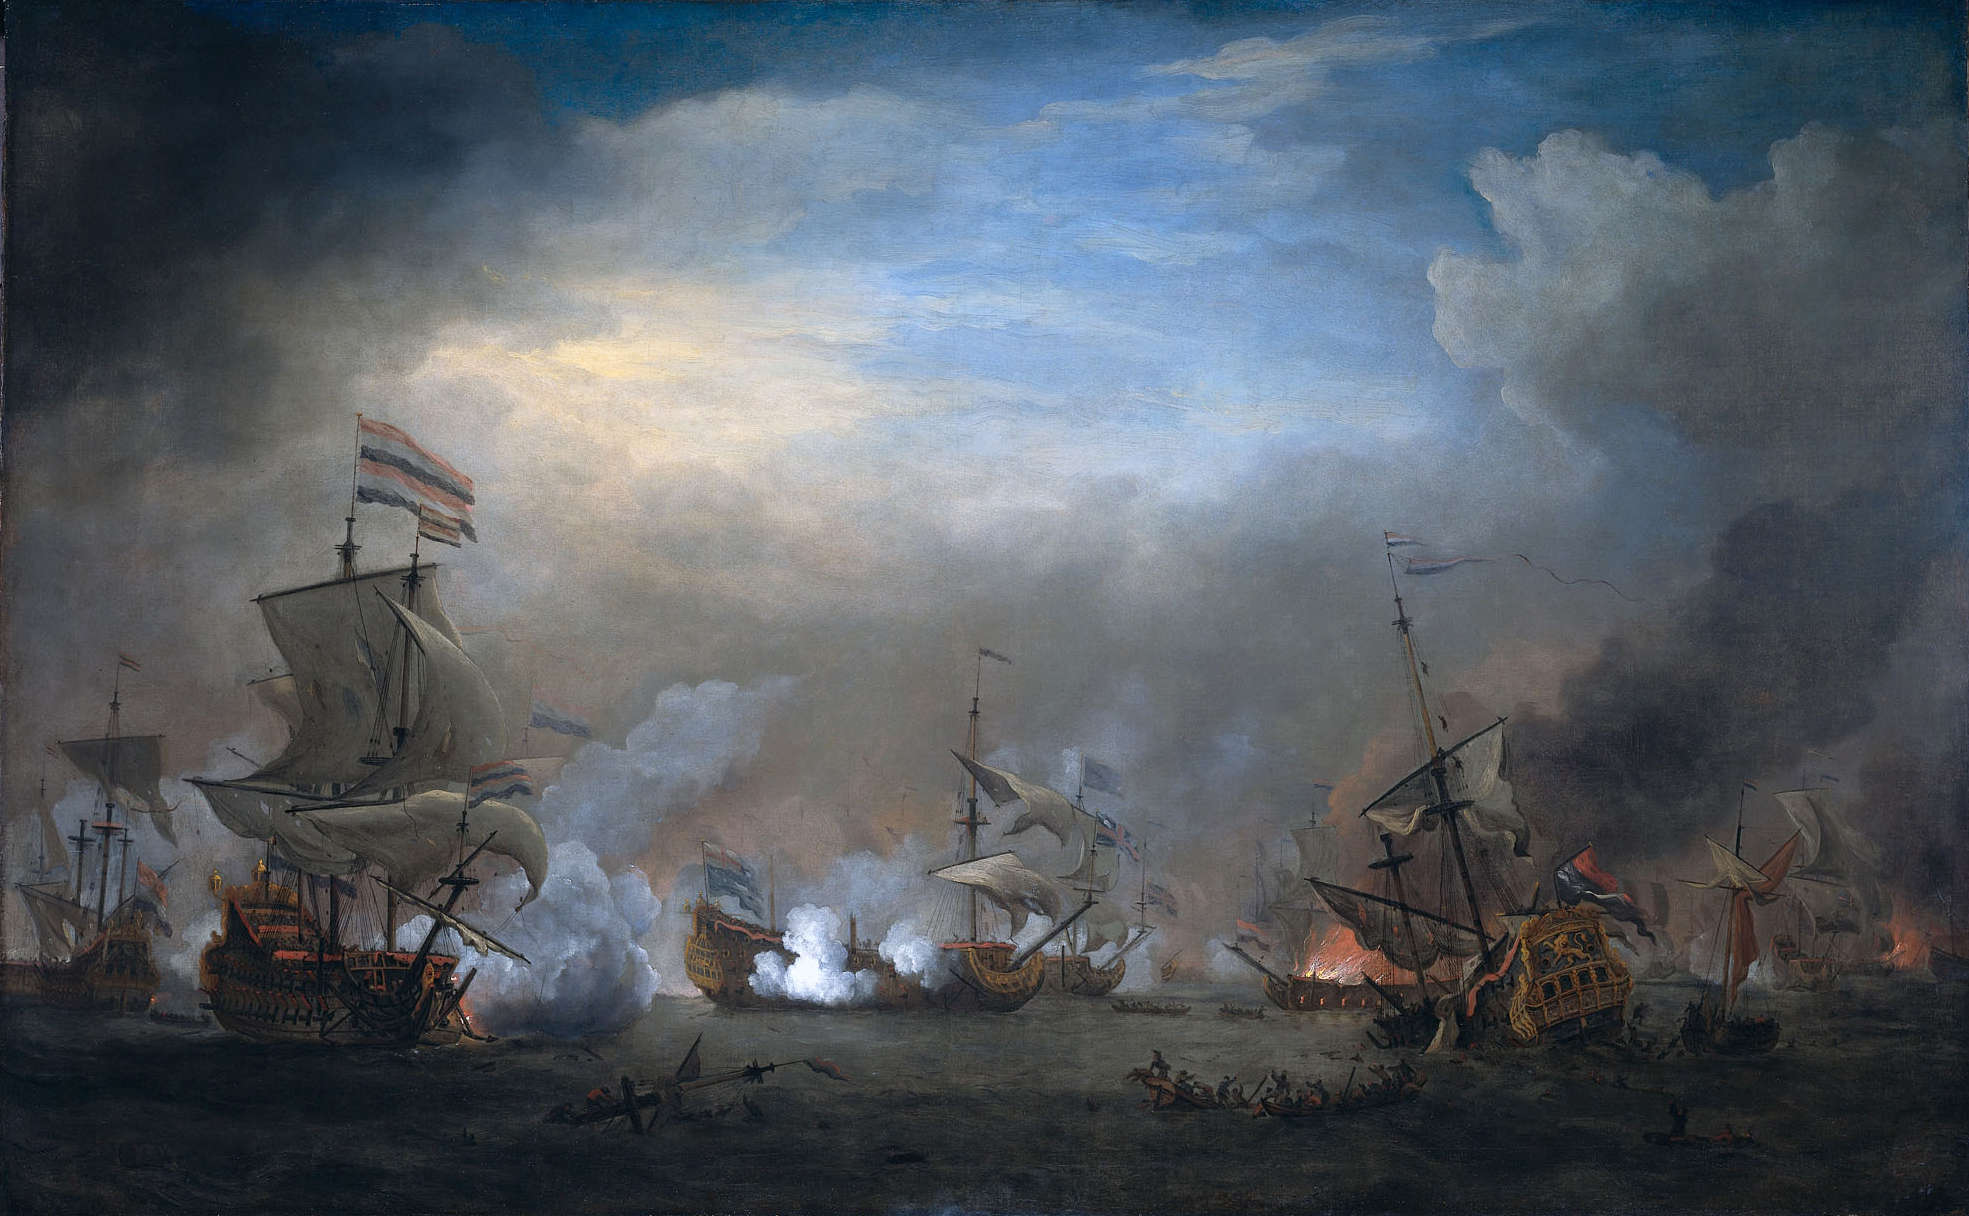 Anglo Dutch War 6
Nightly Fighting Between Cornelis Tromp on the Gouden Leeuw and Sir Edward Spragg on the Royal Prince during the Battle of Texel by Willem van de Velde the Younger